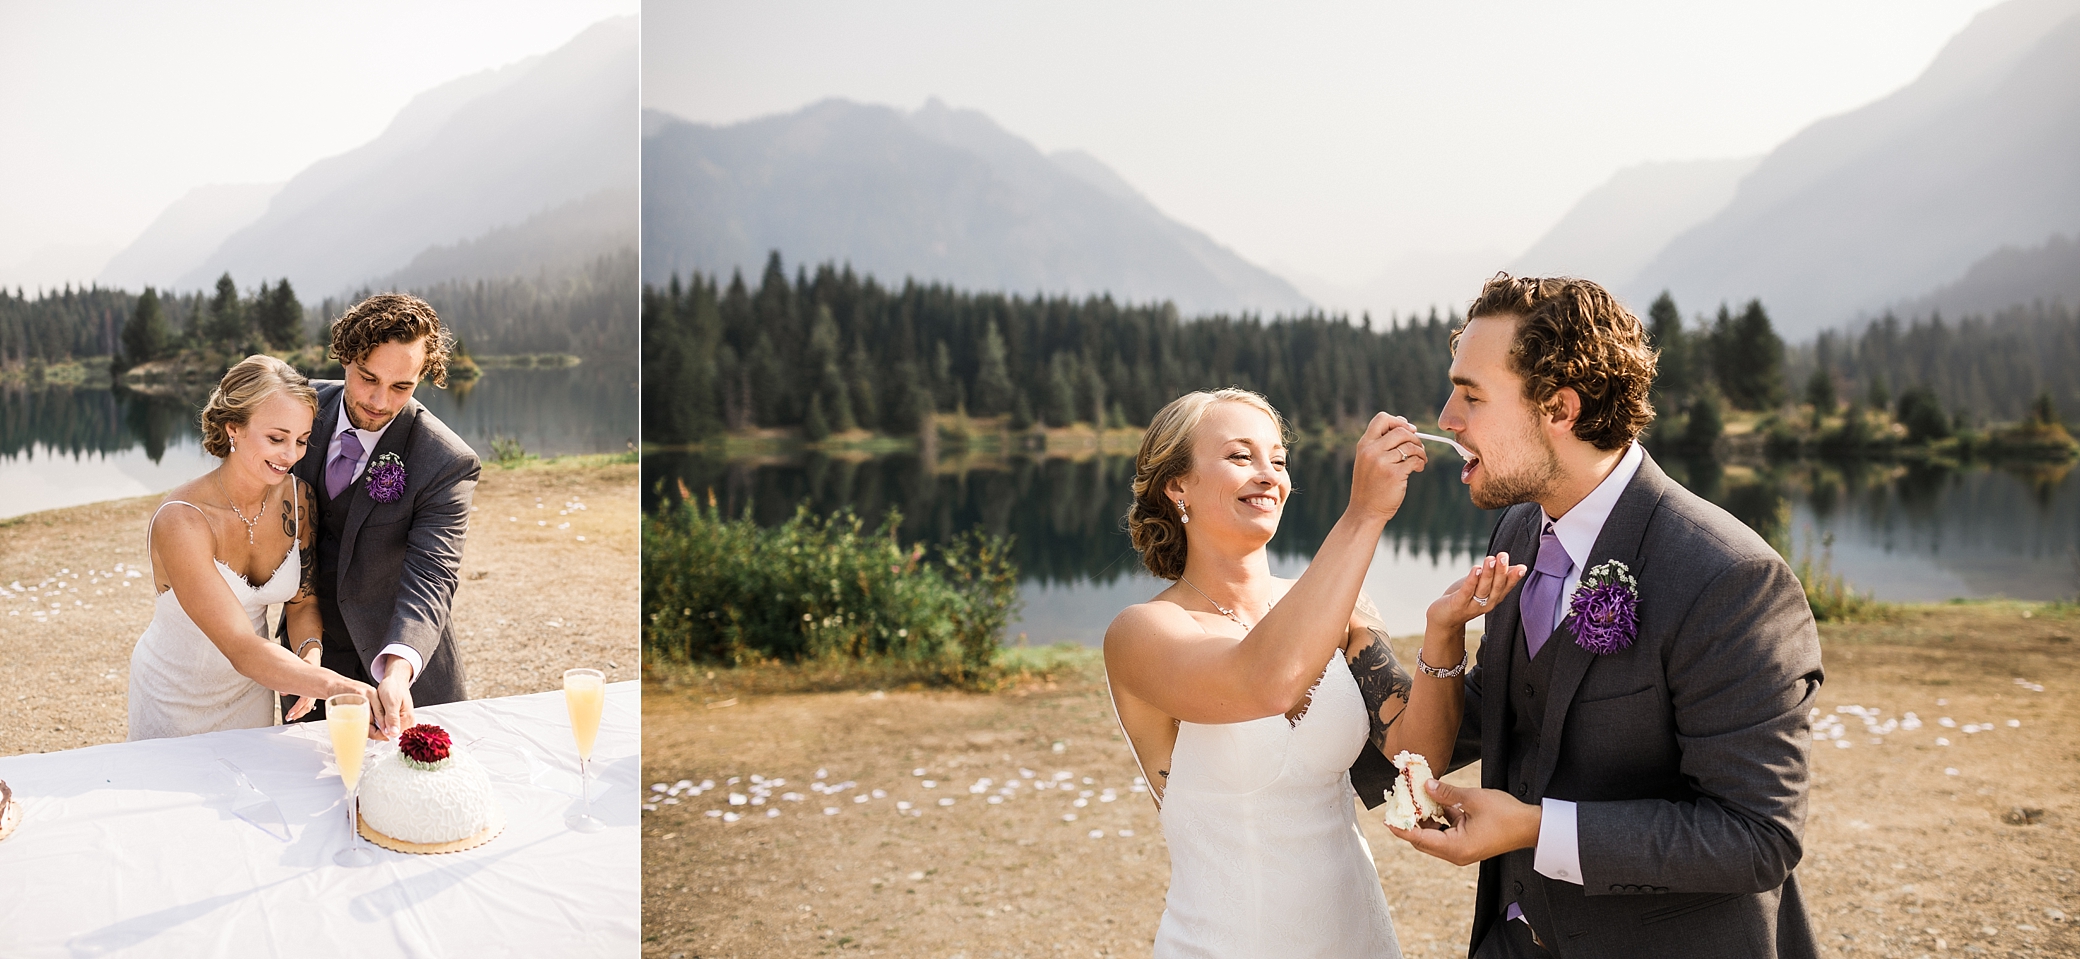 Bride and groom eating cake at their Snoqualmie Elopement | Megan Montalvo Photography